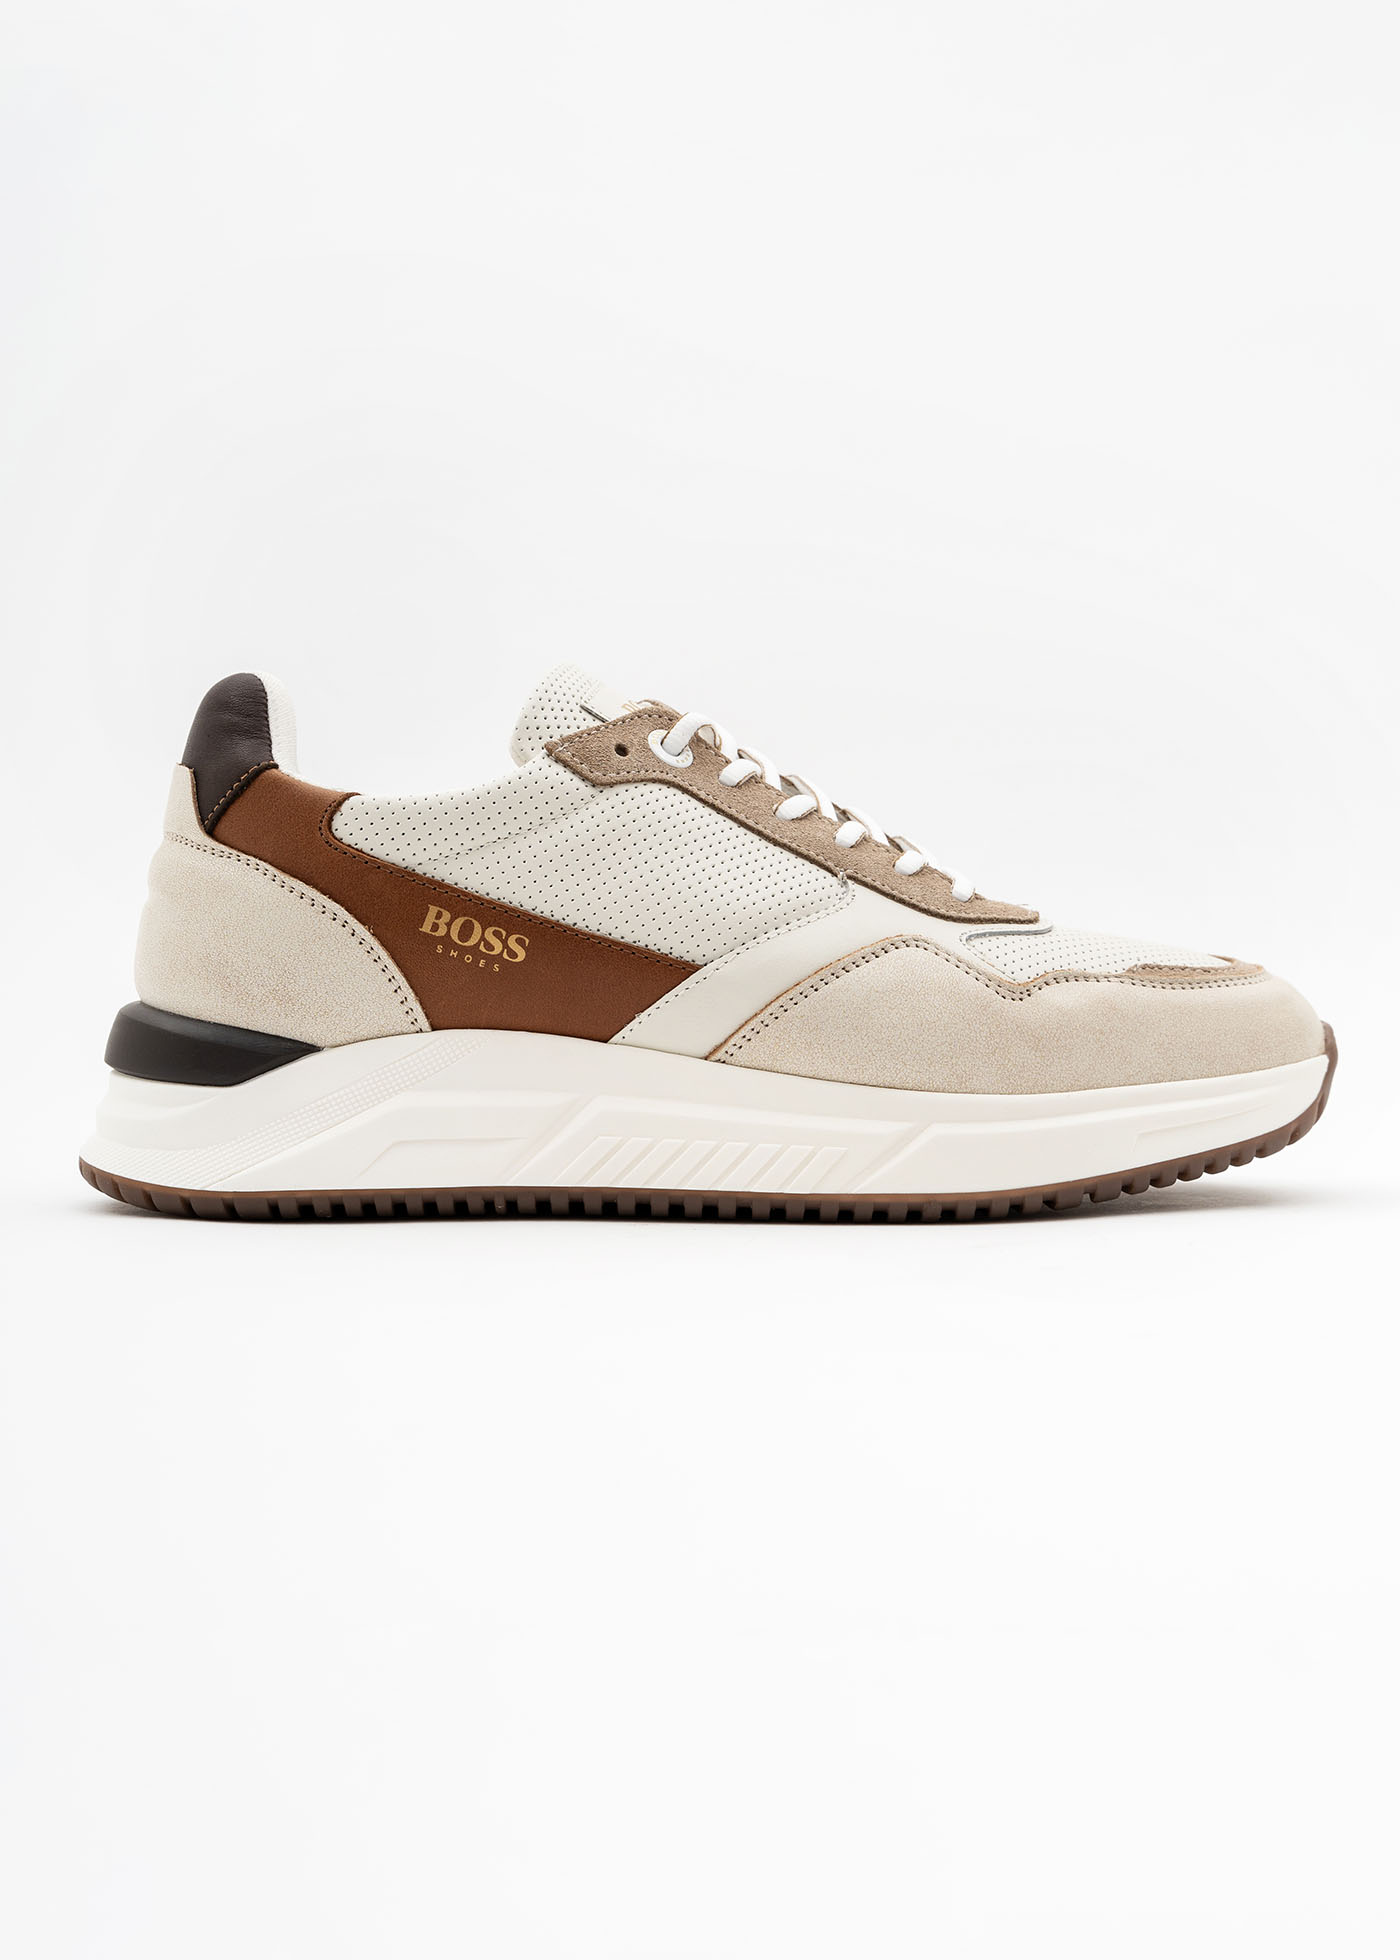 BOSS Shoes Trainers της σειράς Sport - Z640 White Tan